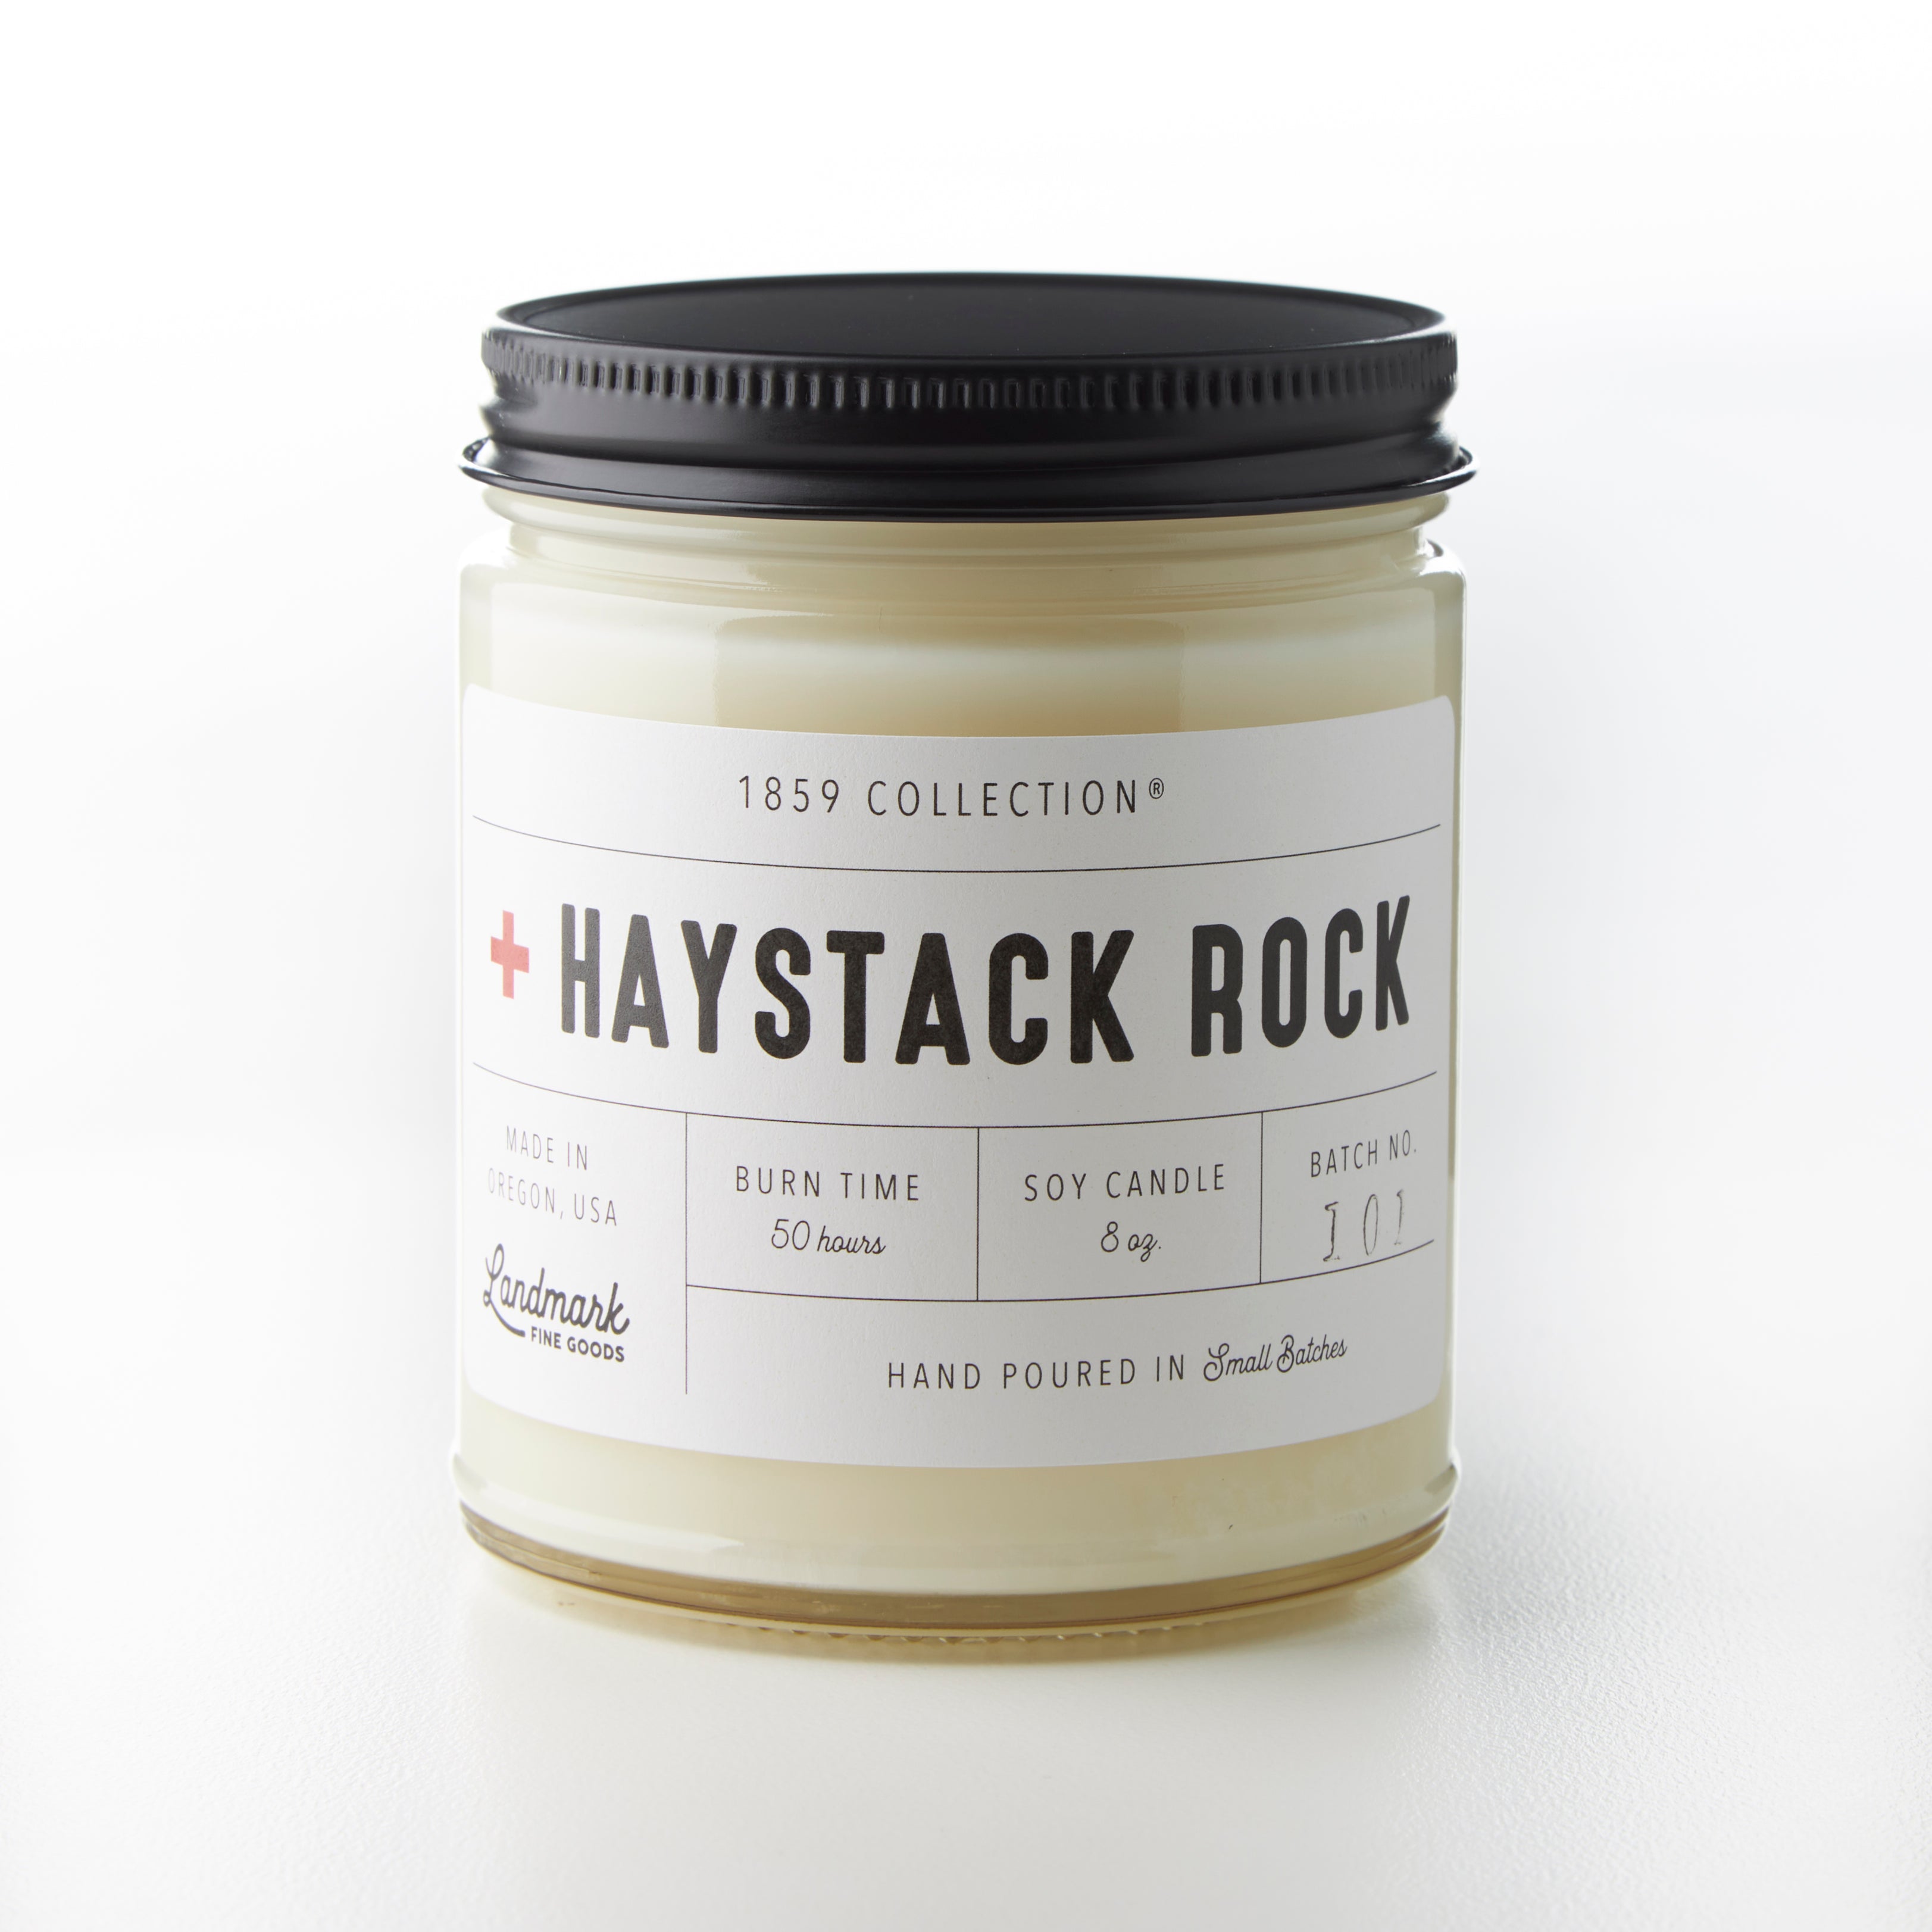 Haystack Rock Candle - 1859 Collection®